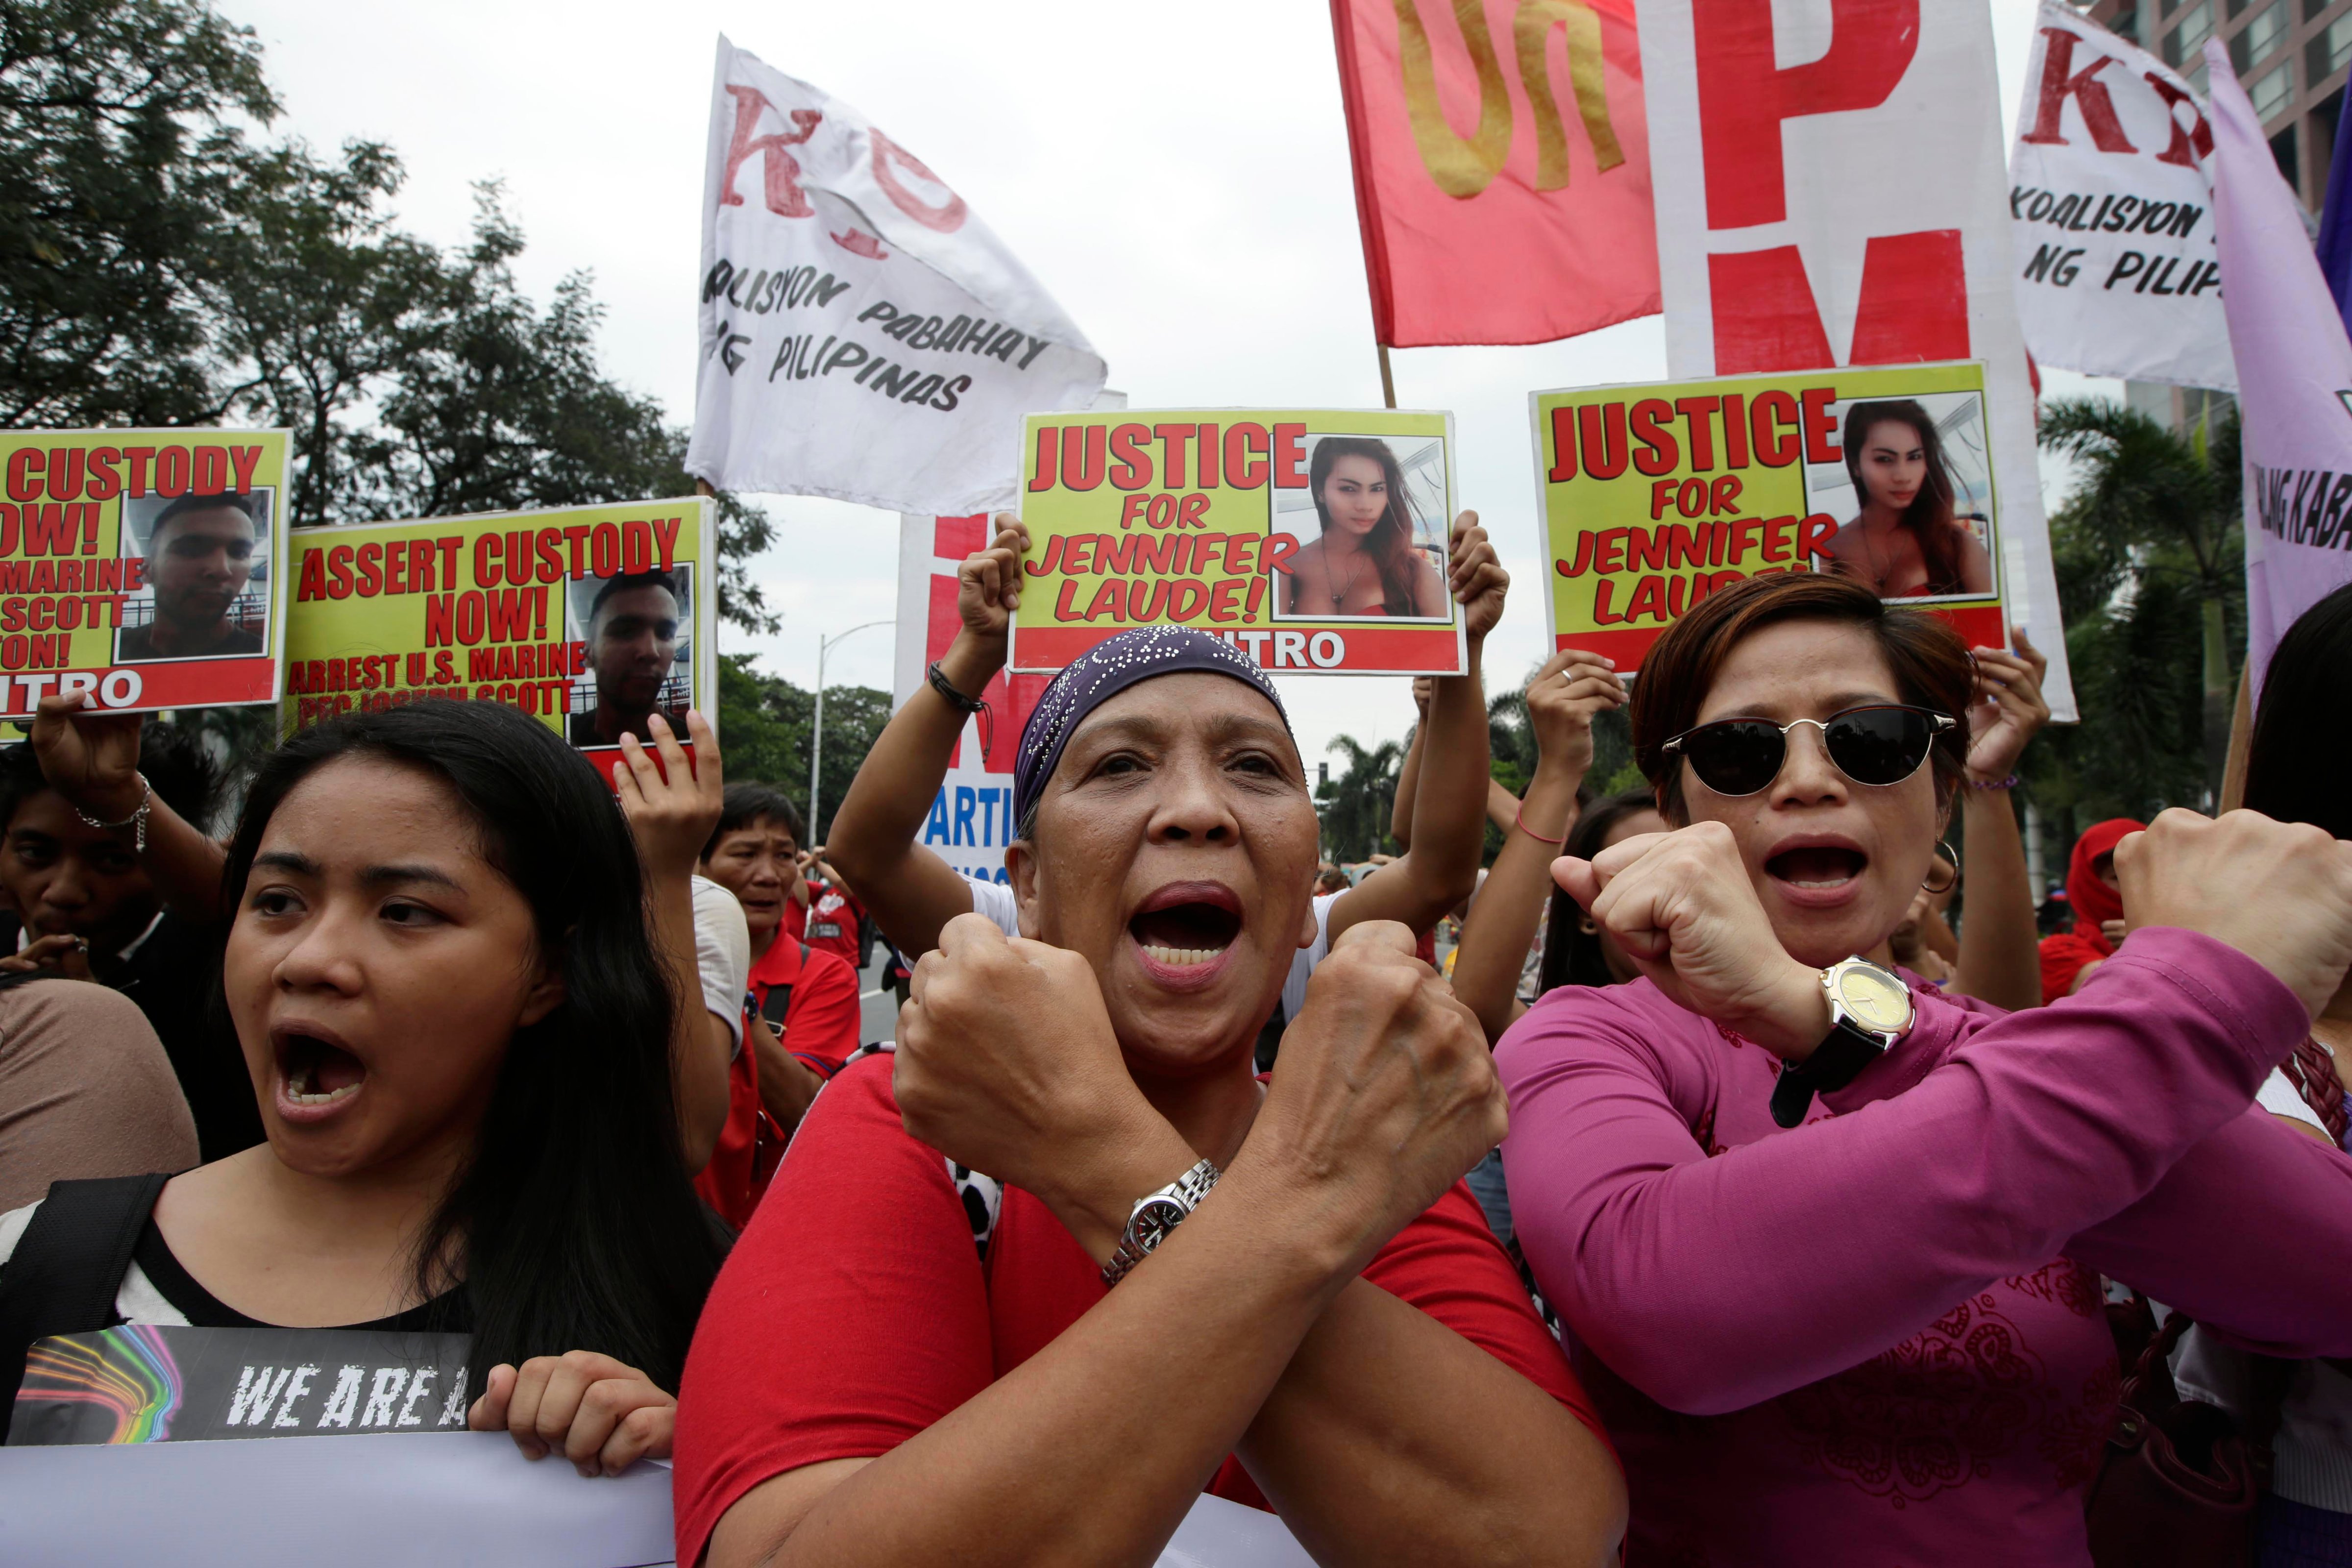 Protesters make cross signs as they shout slogans during a rally outside the U.S. Embassy in Manila, Philippines, Nov. 24, 2014 to demand justice for the Oct. 11 killing of Filipino transgender Jennifer Laude at the former US naval base of Subic. (Bullit Marquez—AP)